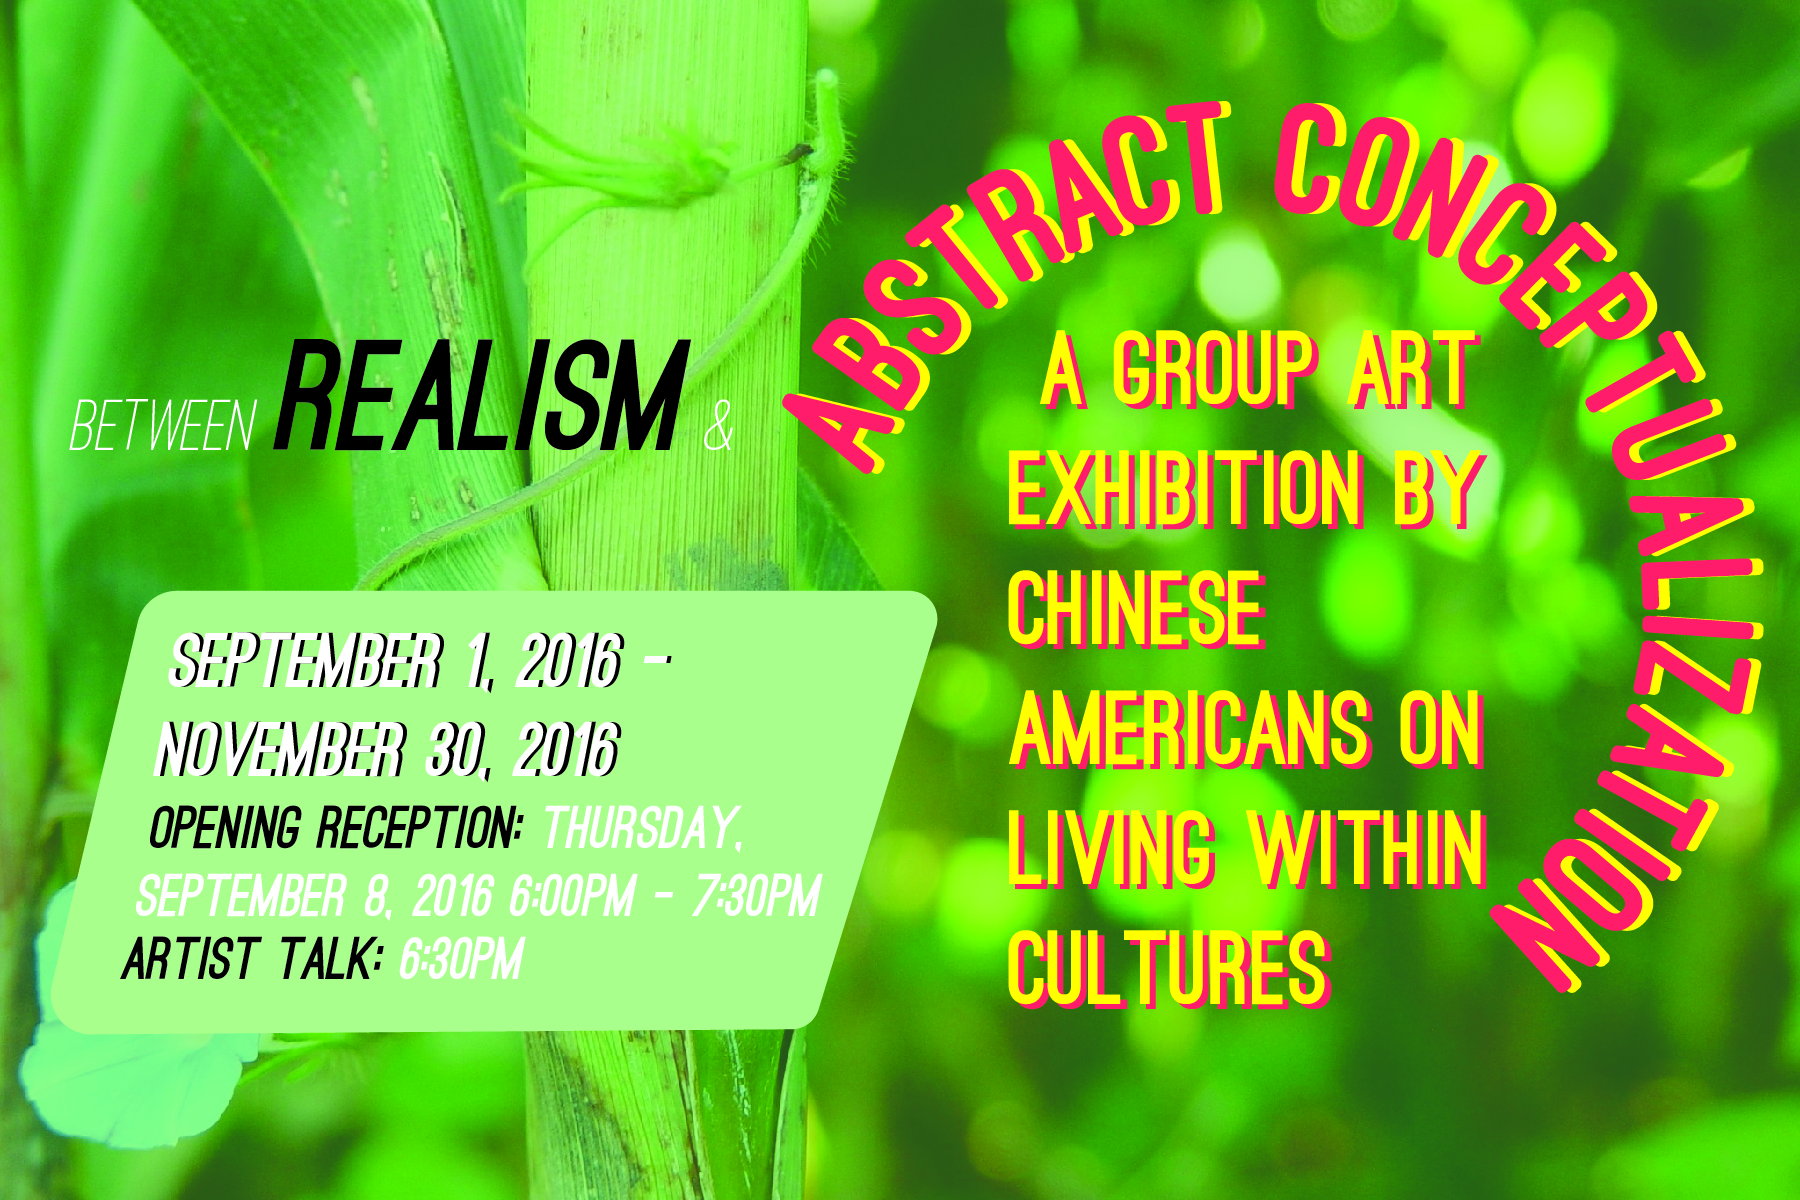 Between Realism & Abstract Conceptualization poster featuring unfocused photo of green plants in background